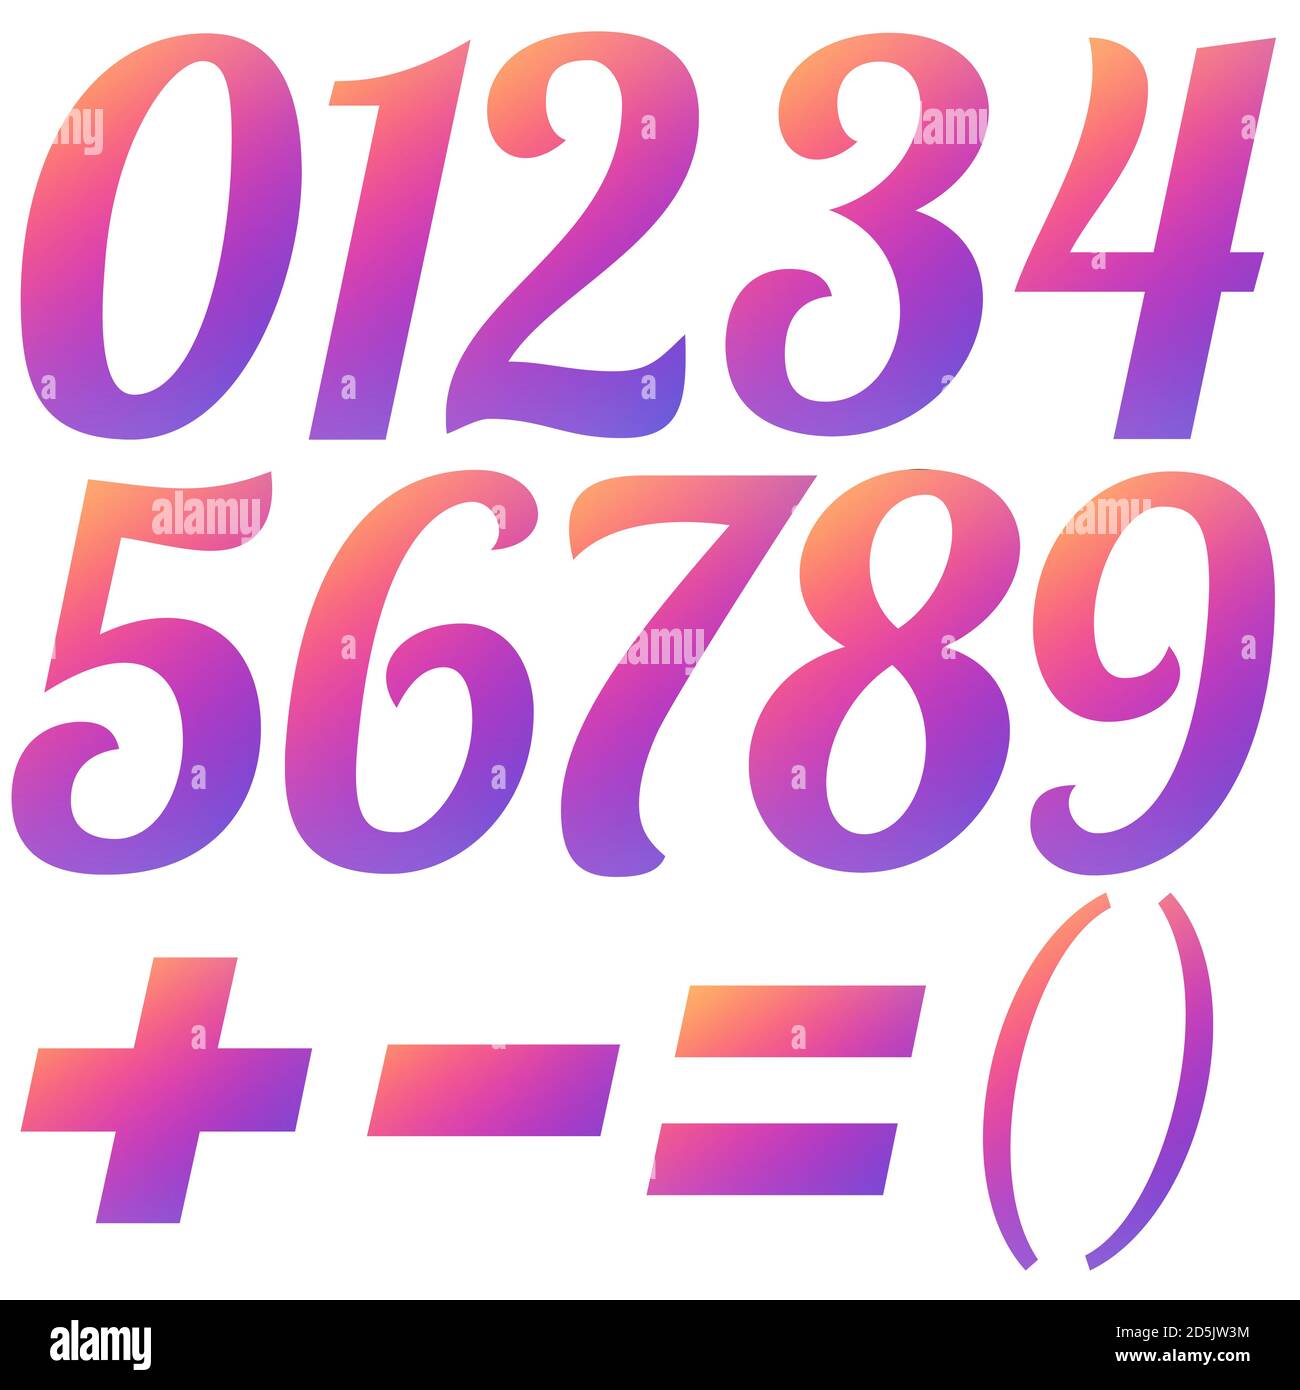 Set gradient numbers in social media colors. Isolated symbols on white background. Digital stock illustration. Stock Photo